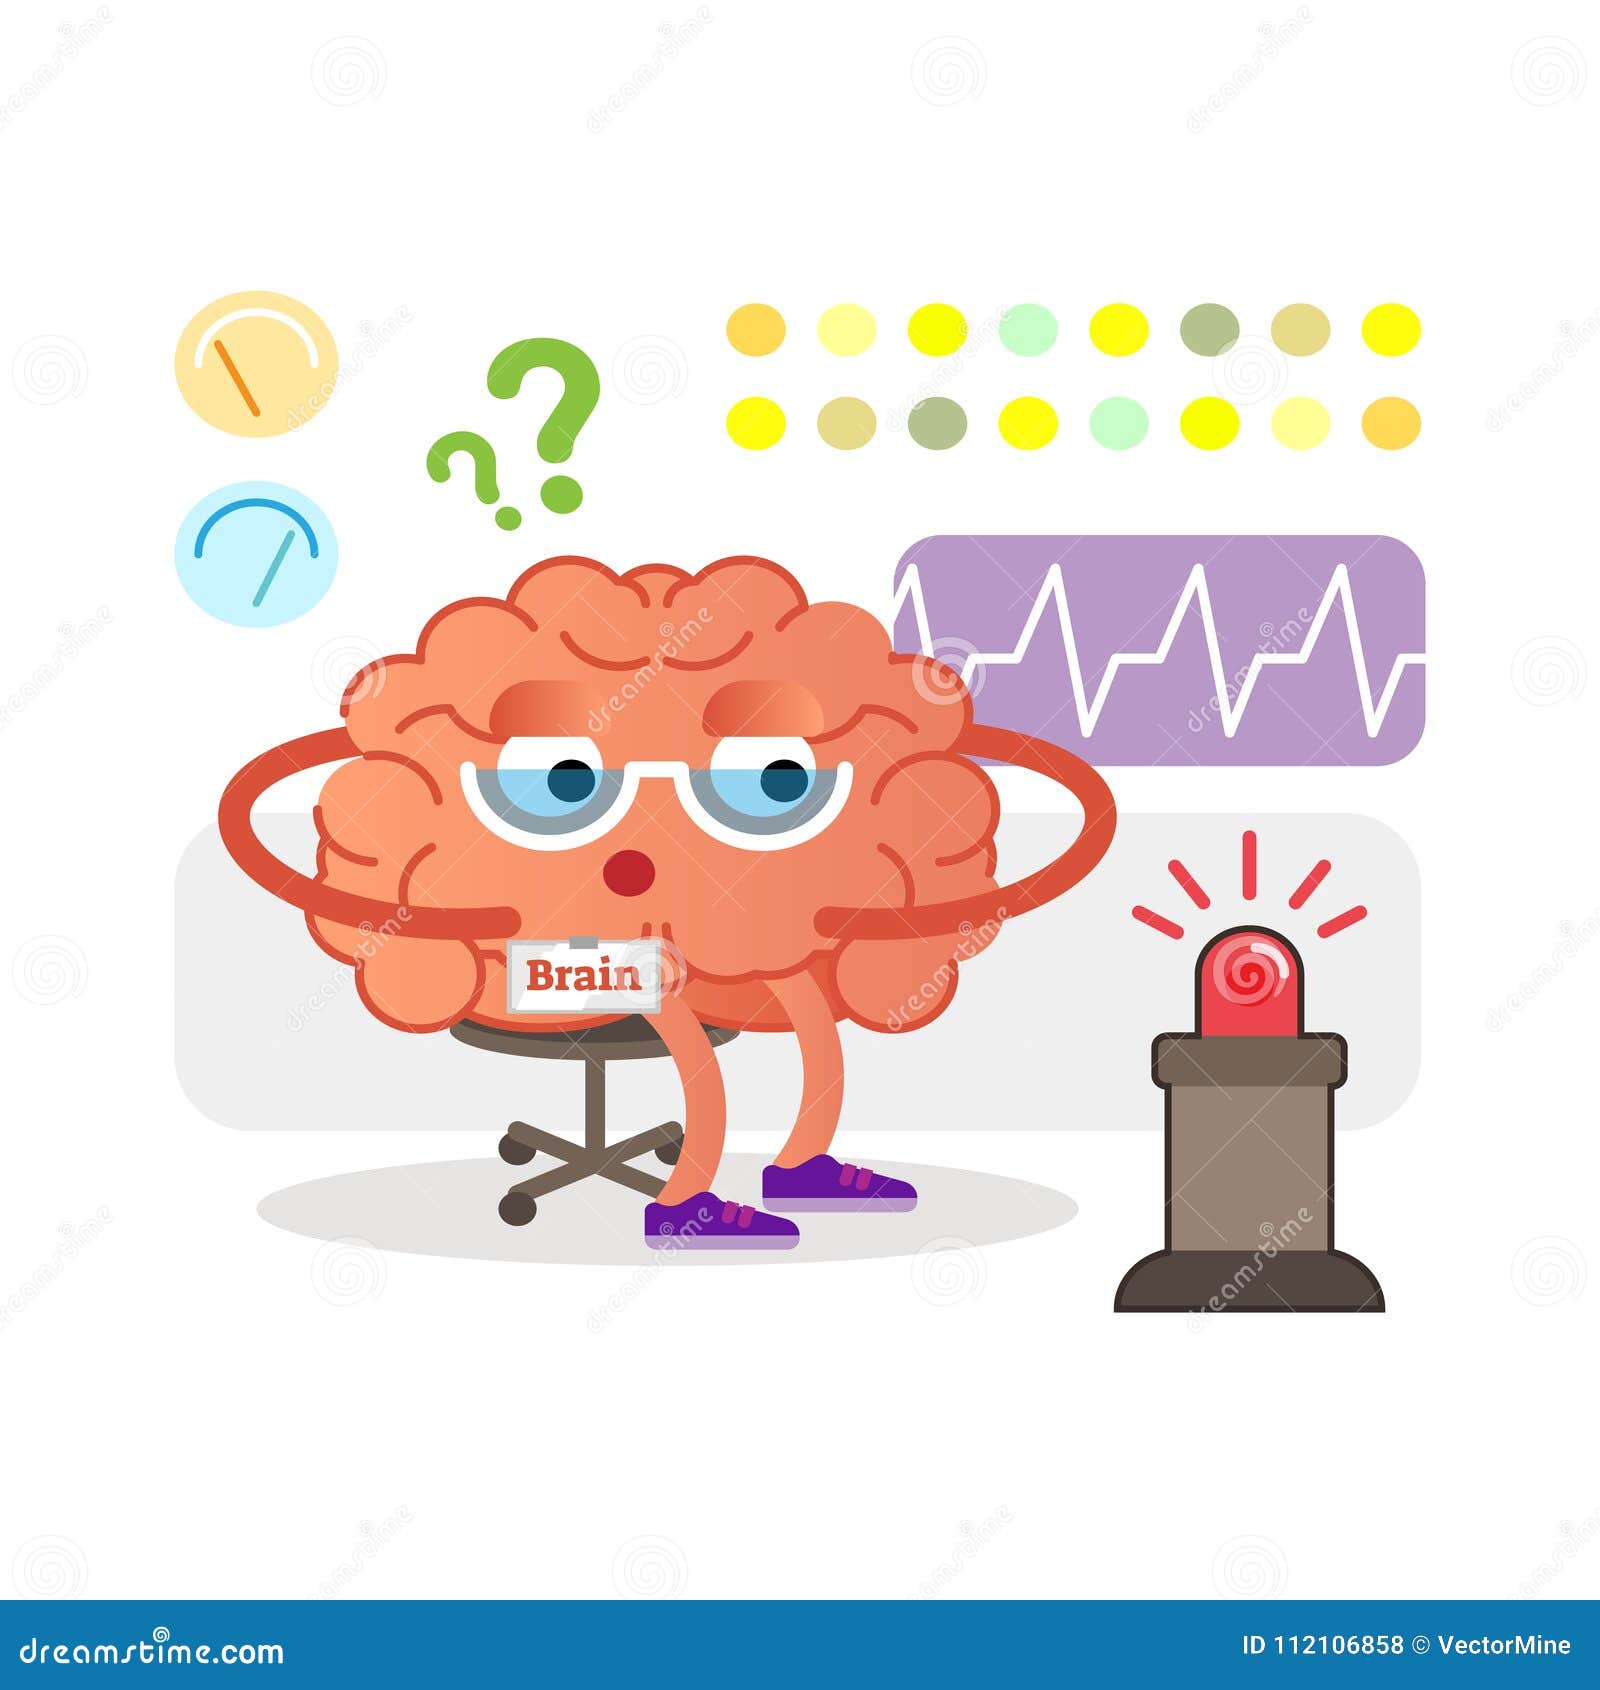 conceptual brain cartoon character monitoring and receiving signals. health care and medicine.